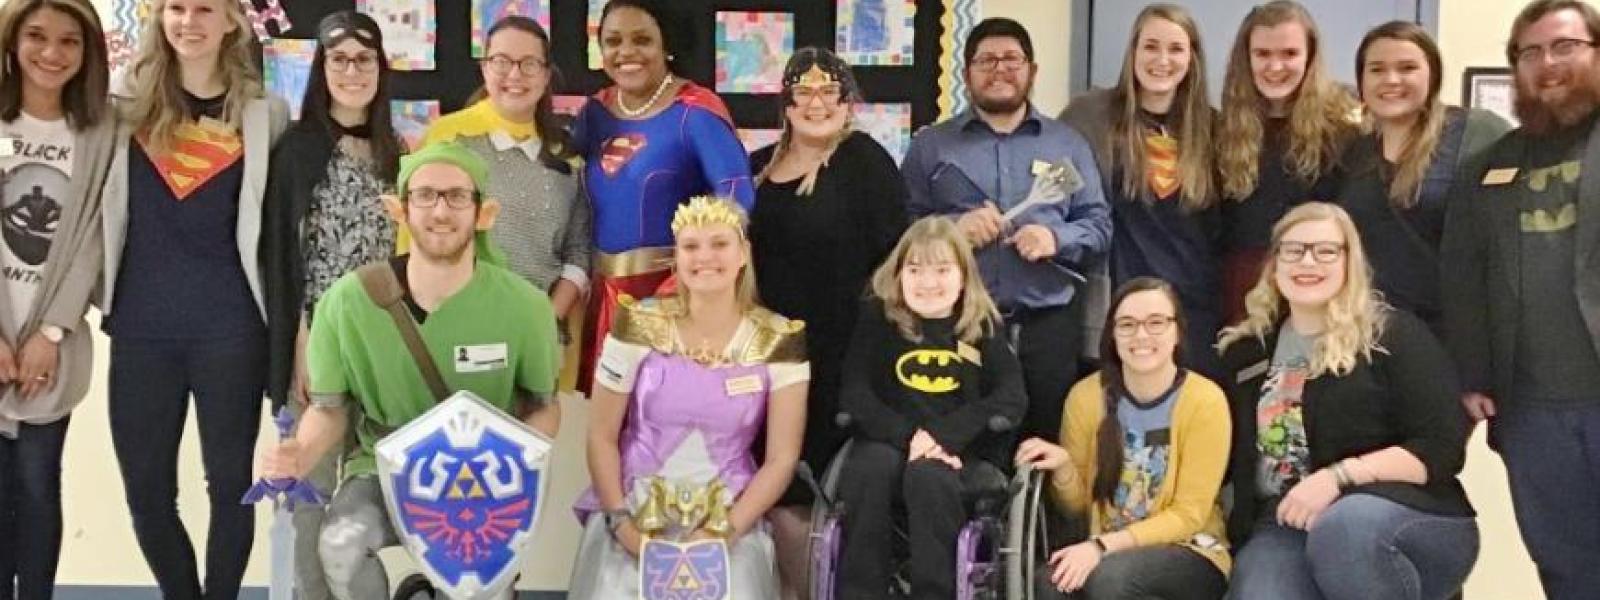 CIU students turned into Super Heroes. 